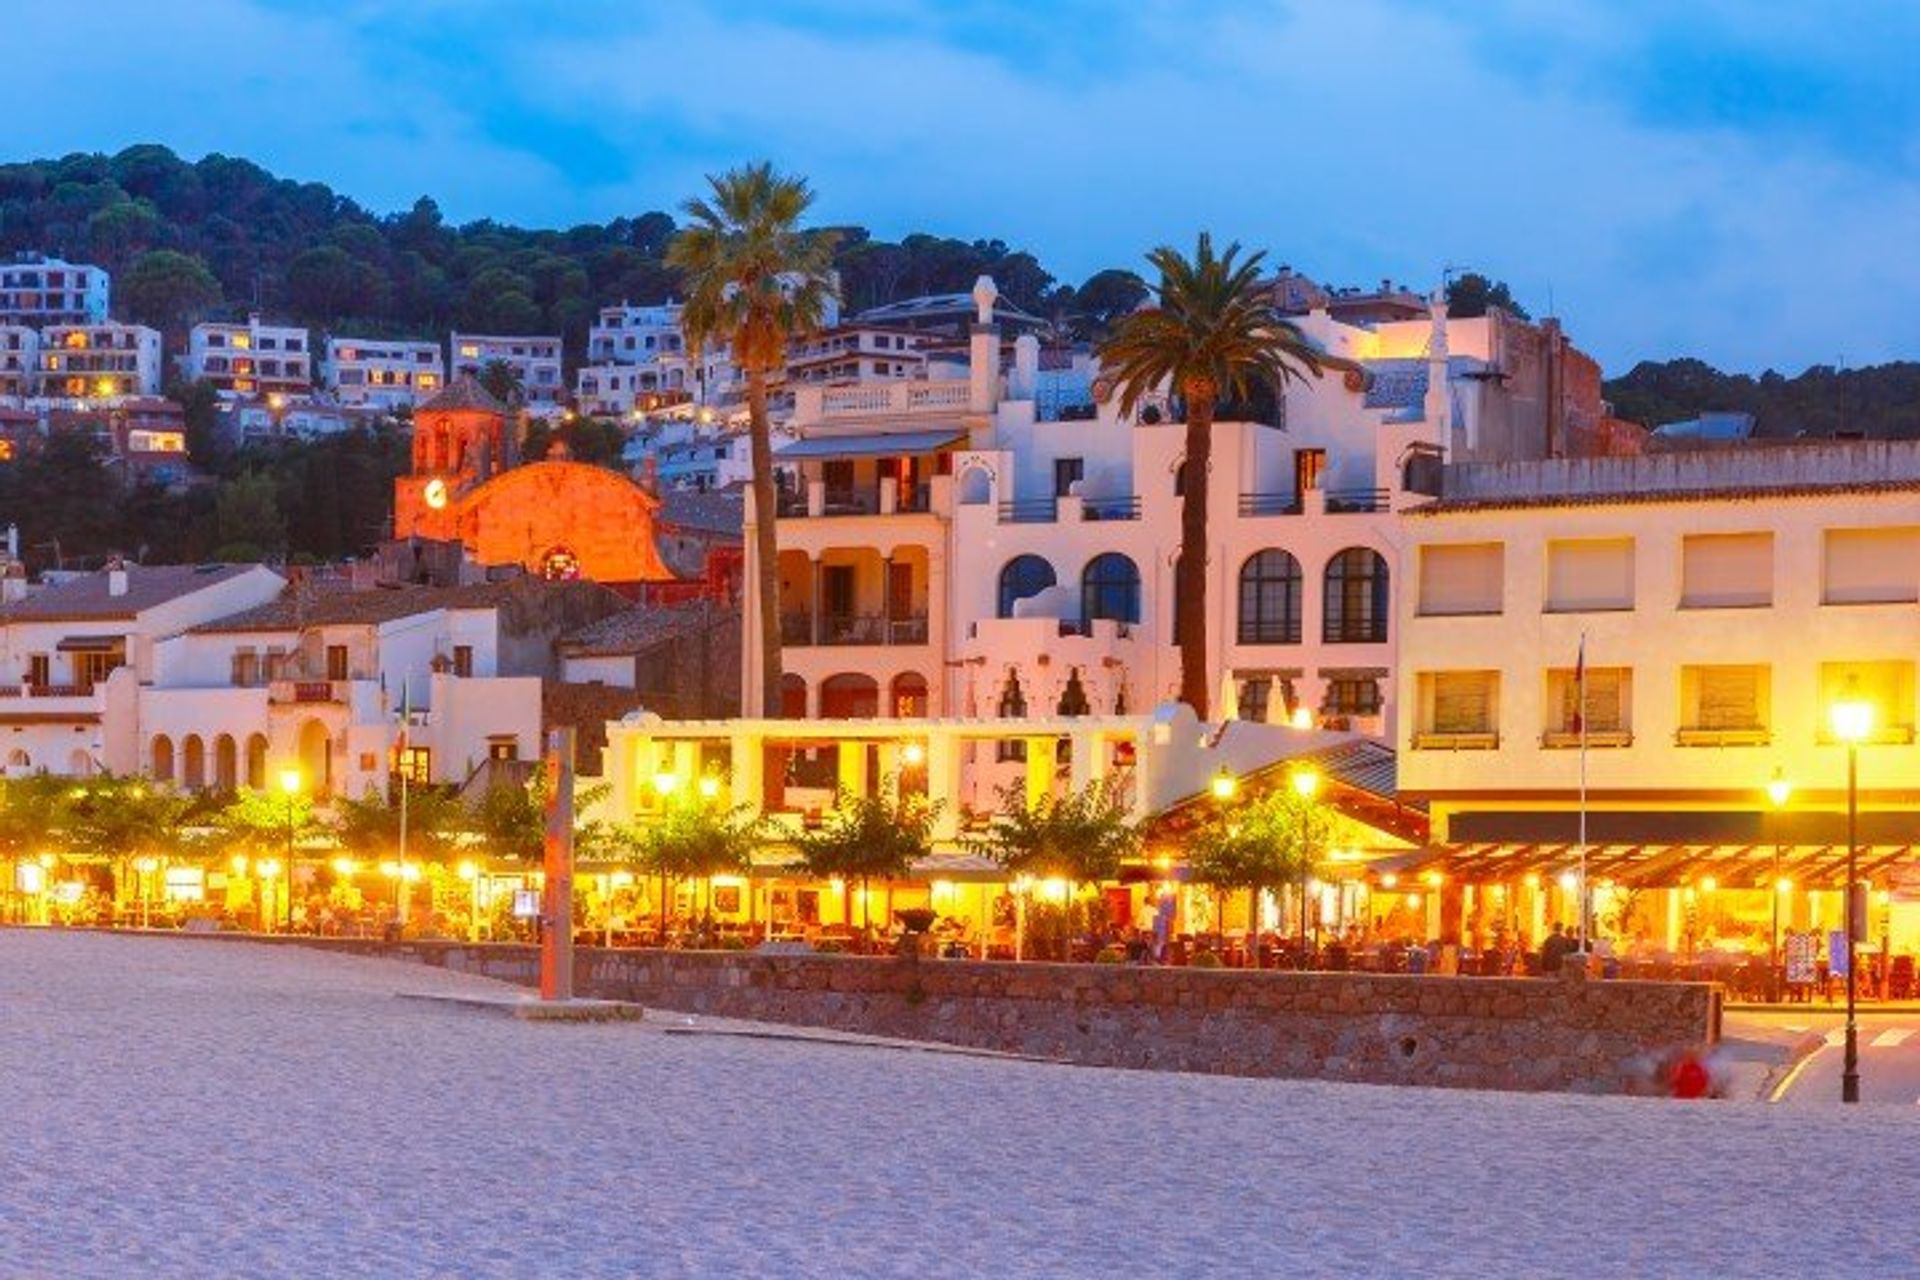 Tossa de Mar's modern palm-lined promenade really comes to life at night